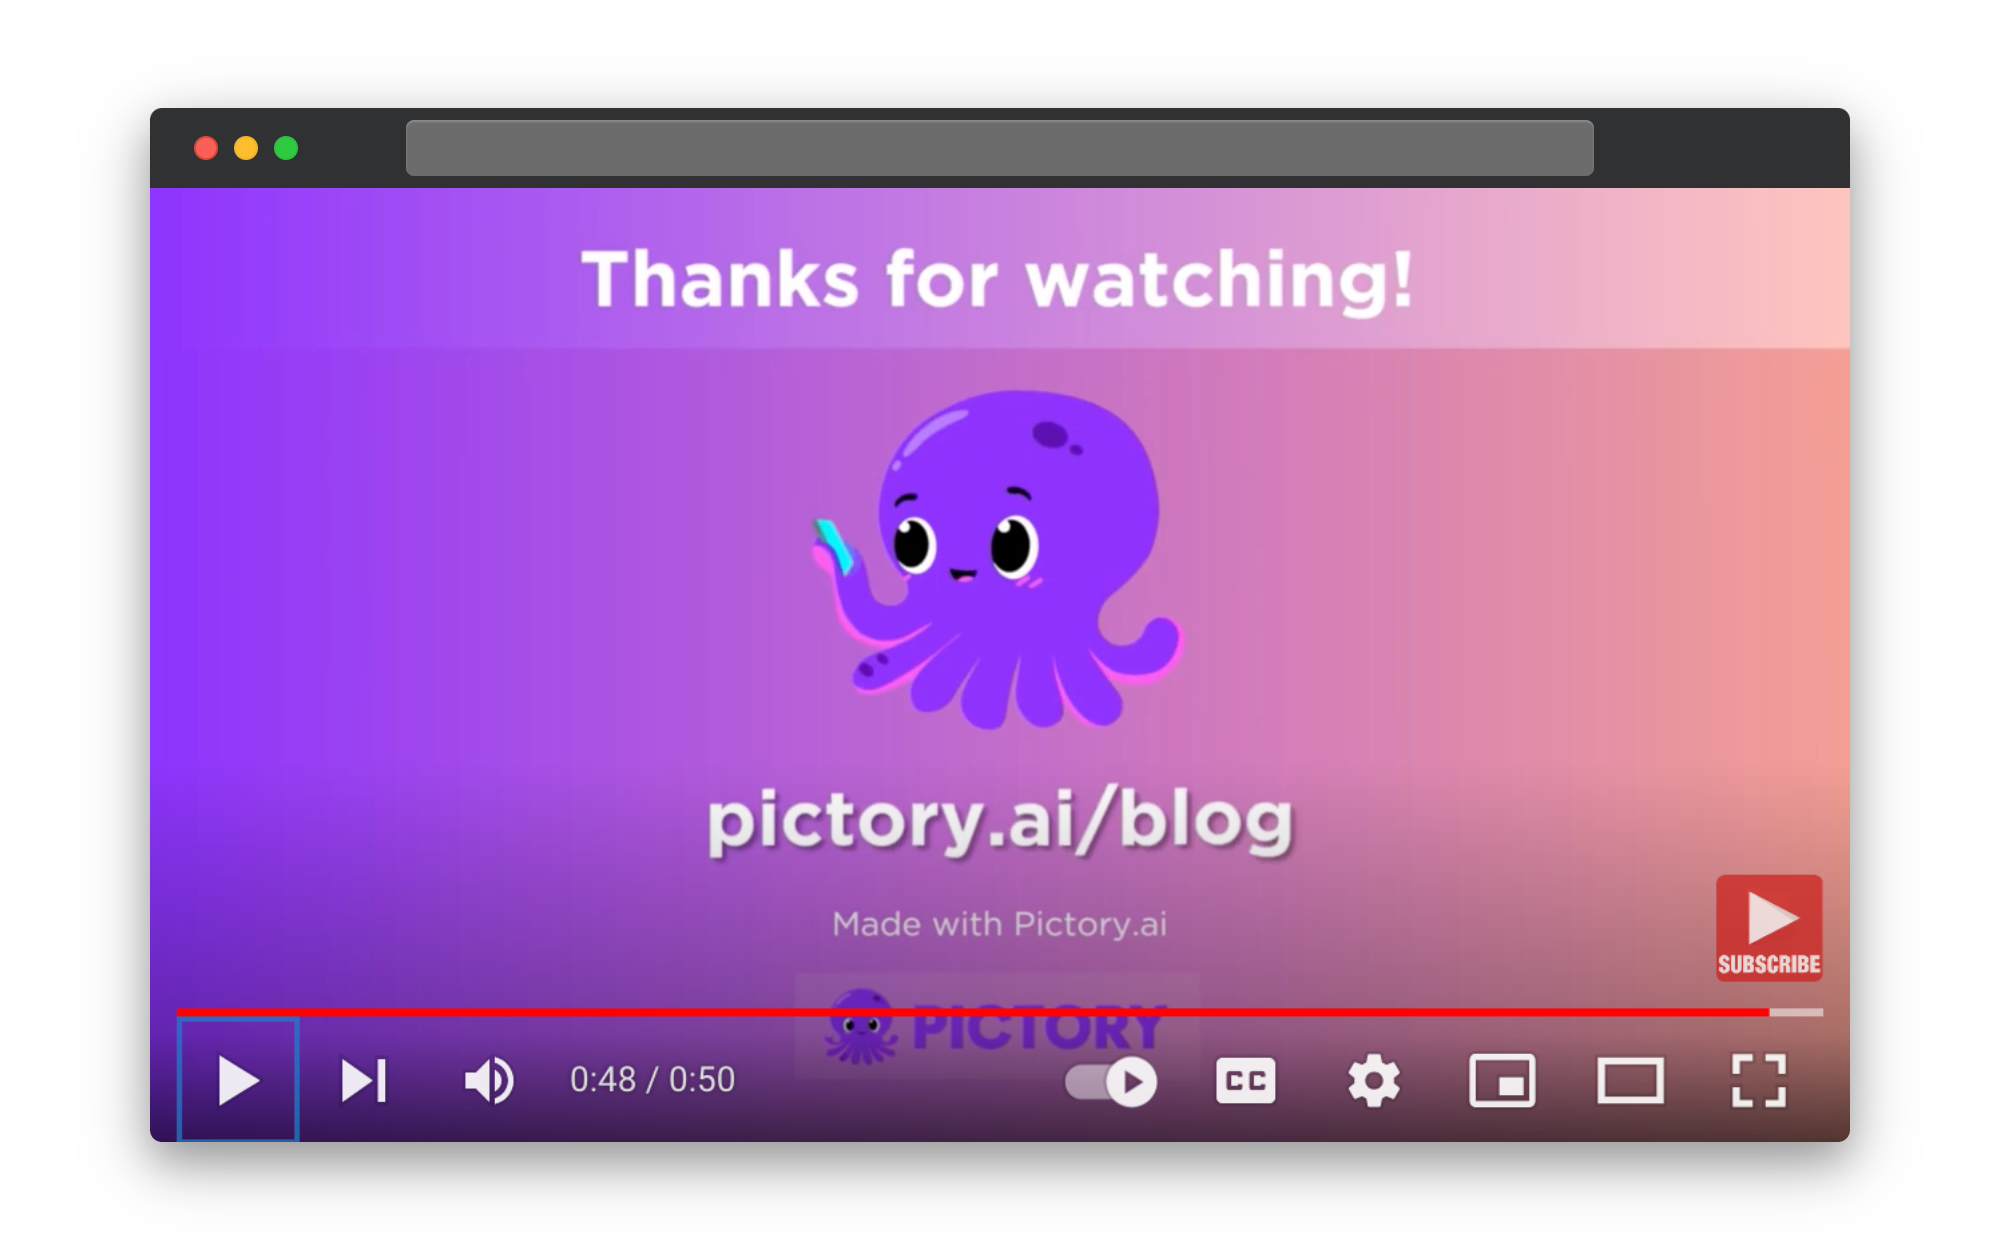 This image is showing Pictory's outro.